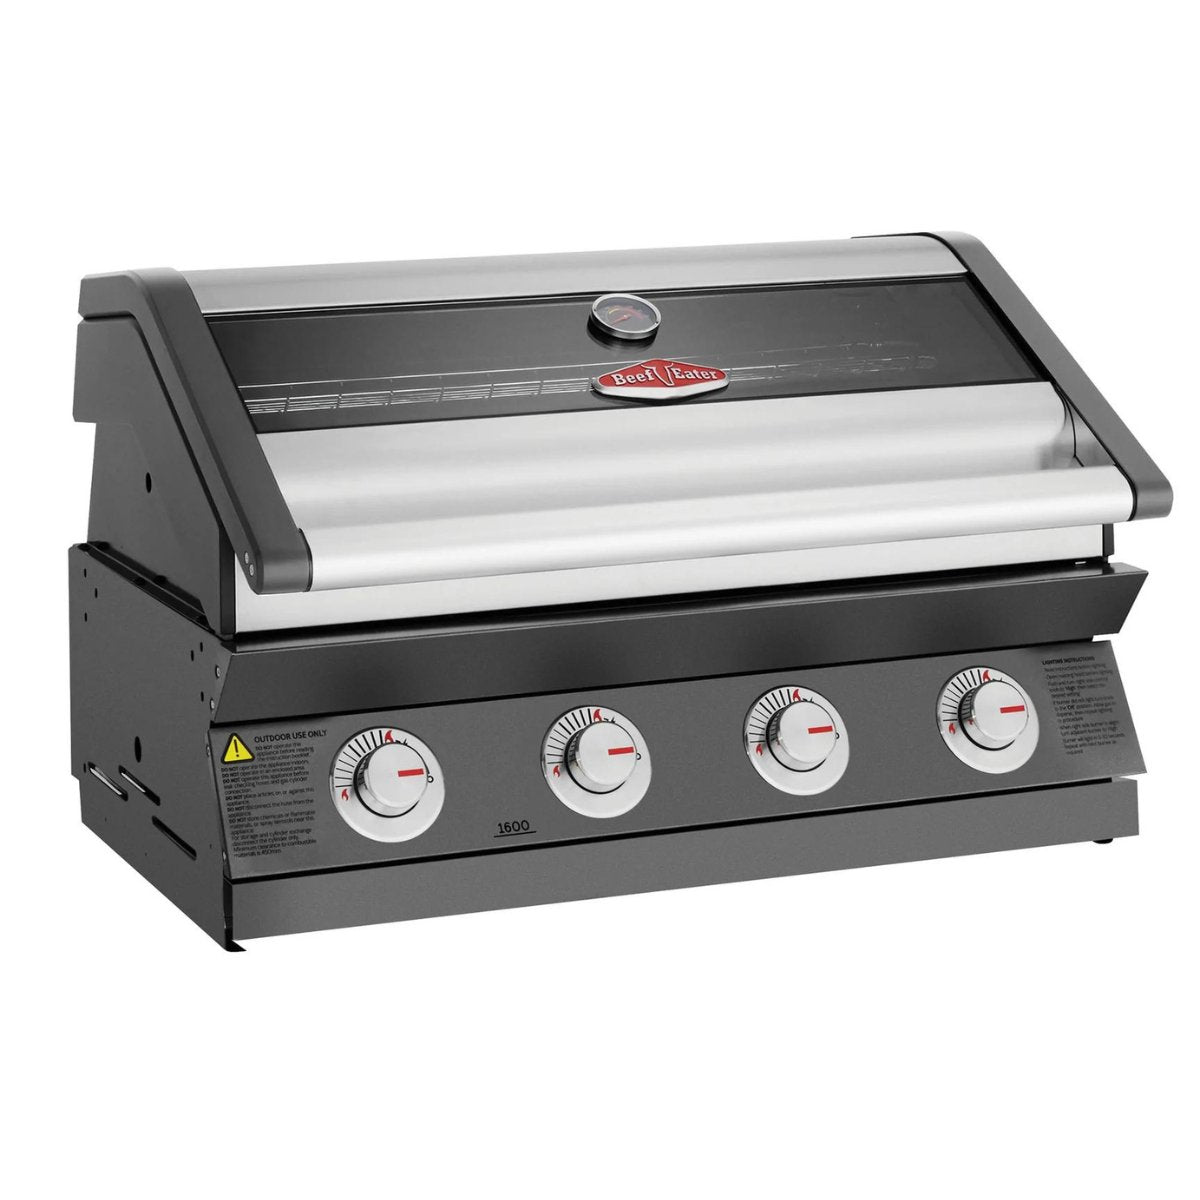 Beefeater 1600E 4 Burner Built-In Grill - Kitchen In The Garden